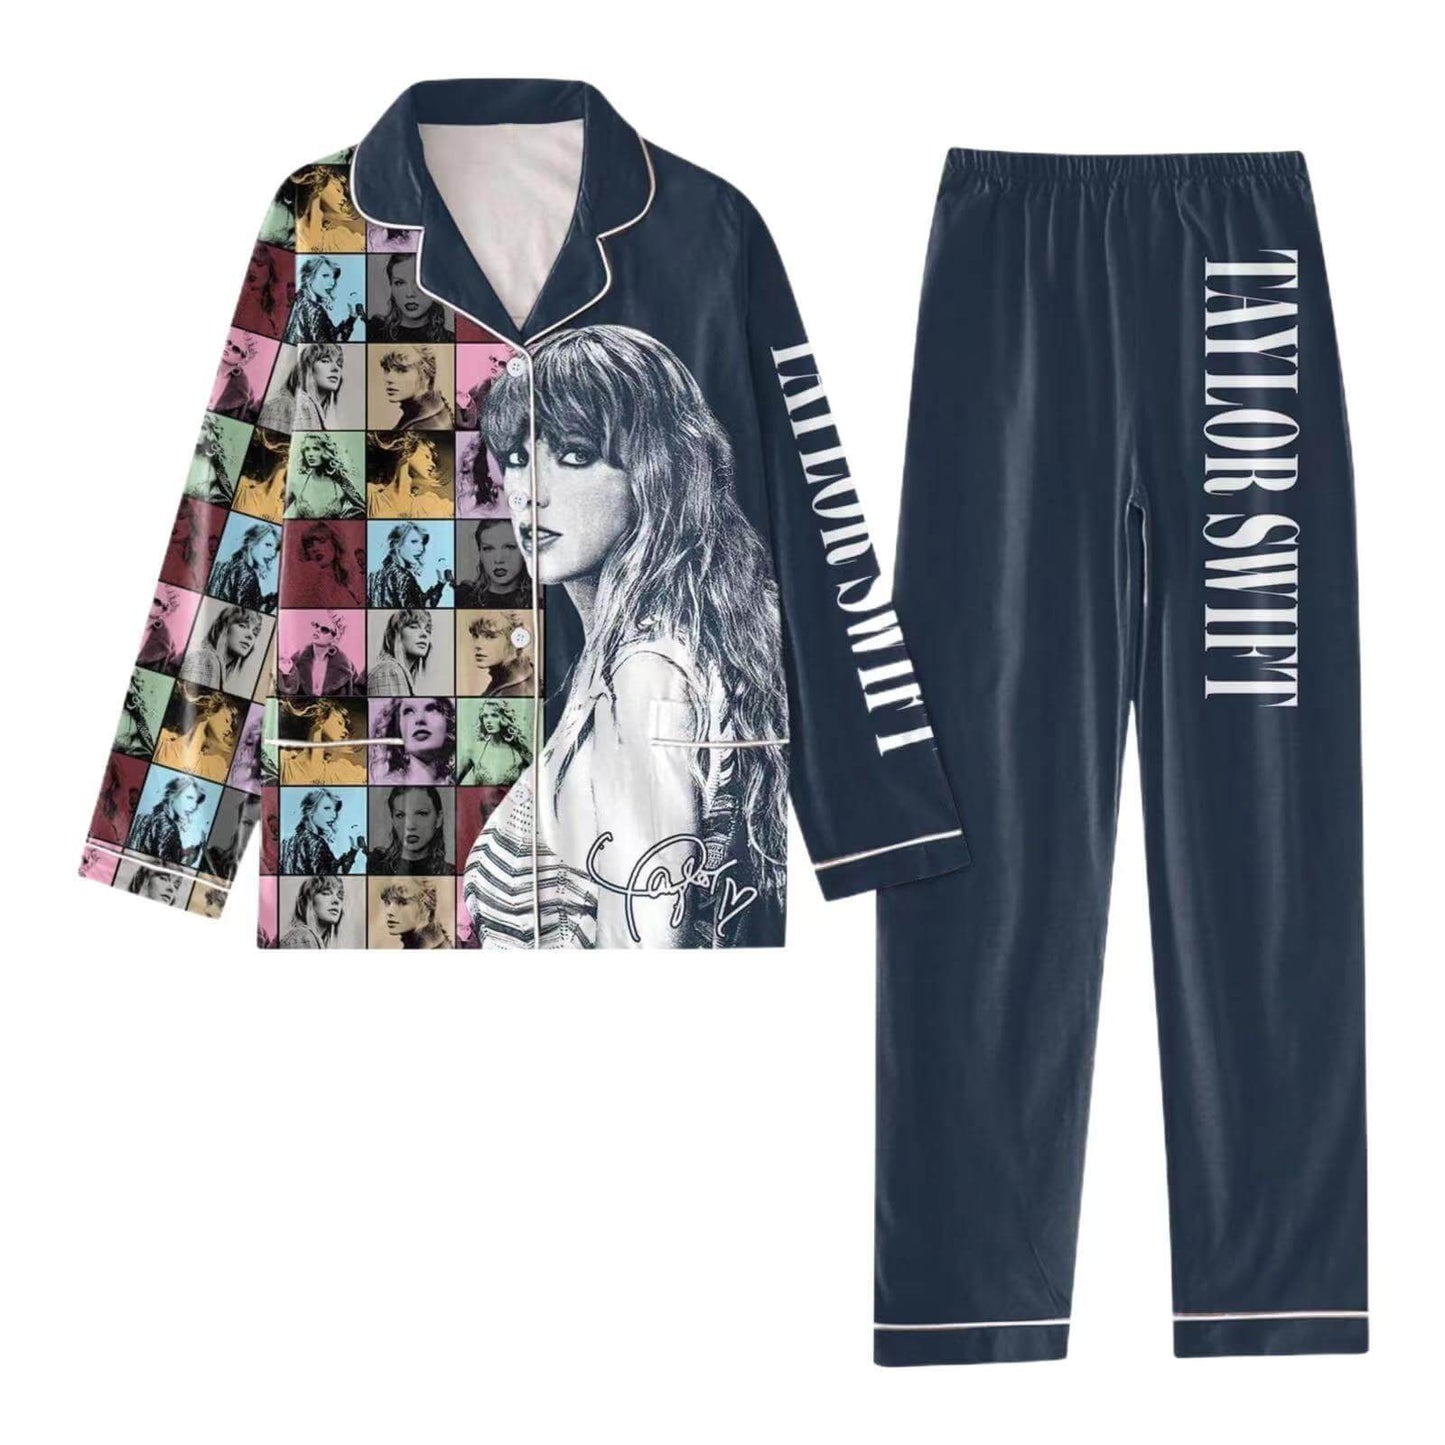 Taylor Swift Print Pajamas Suit Sleepwear Outfits LOONFUNG